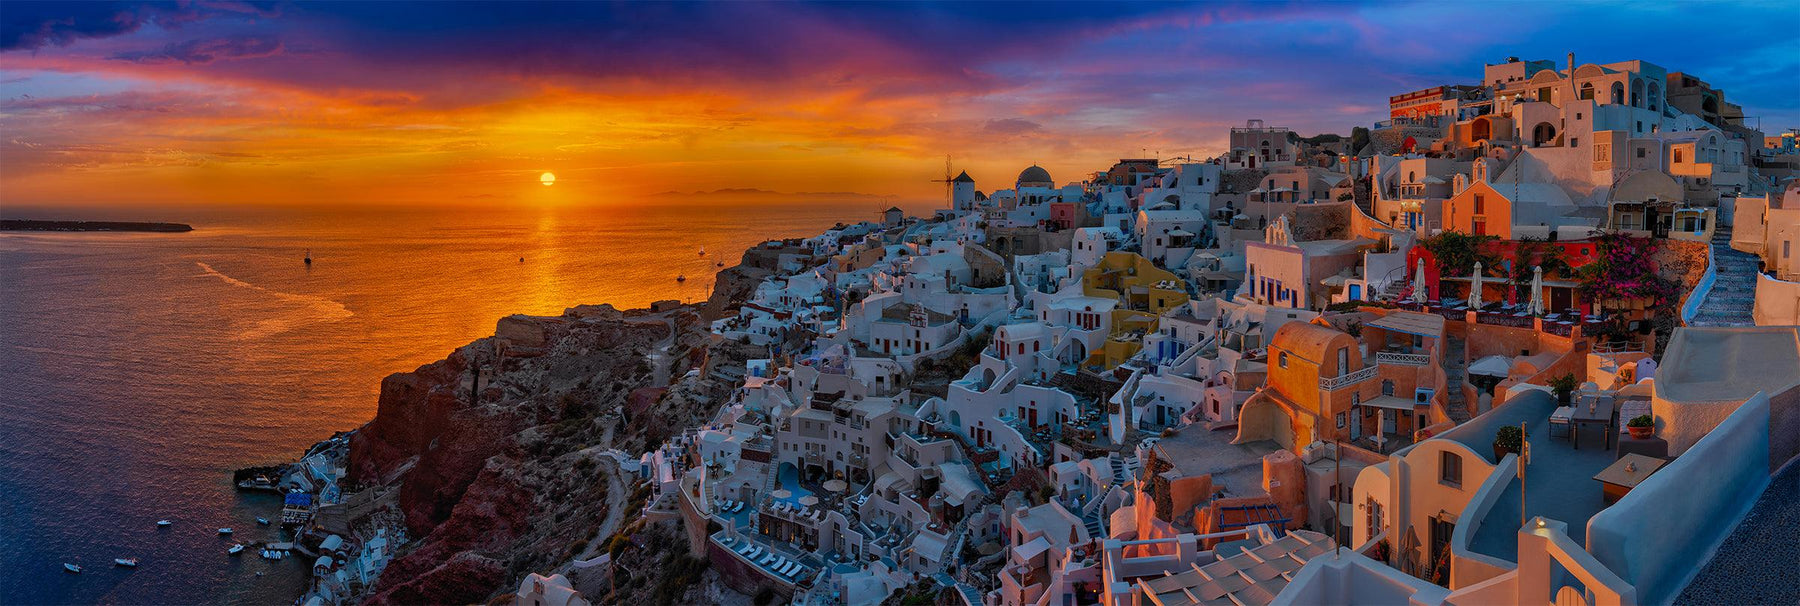 White and orange buildings along the cliffs of Santorini Greece with the sun setting over the ocean behind